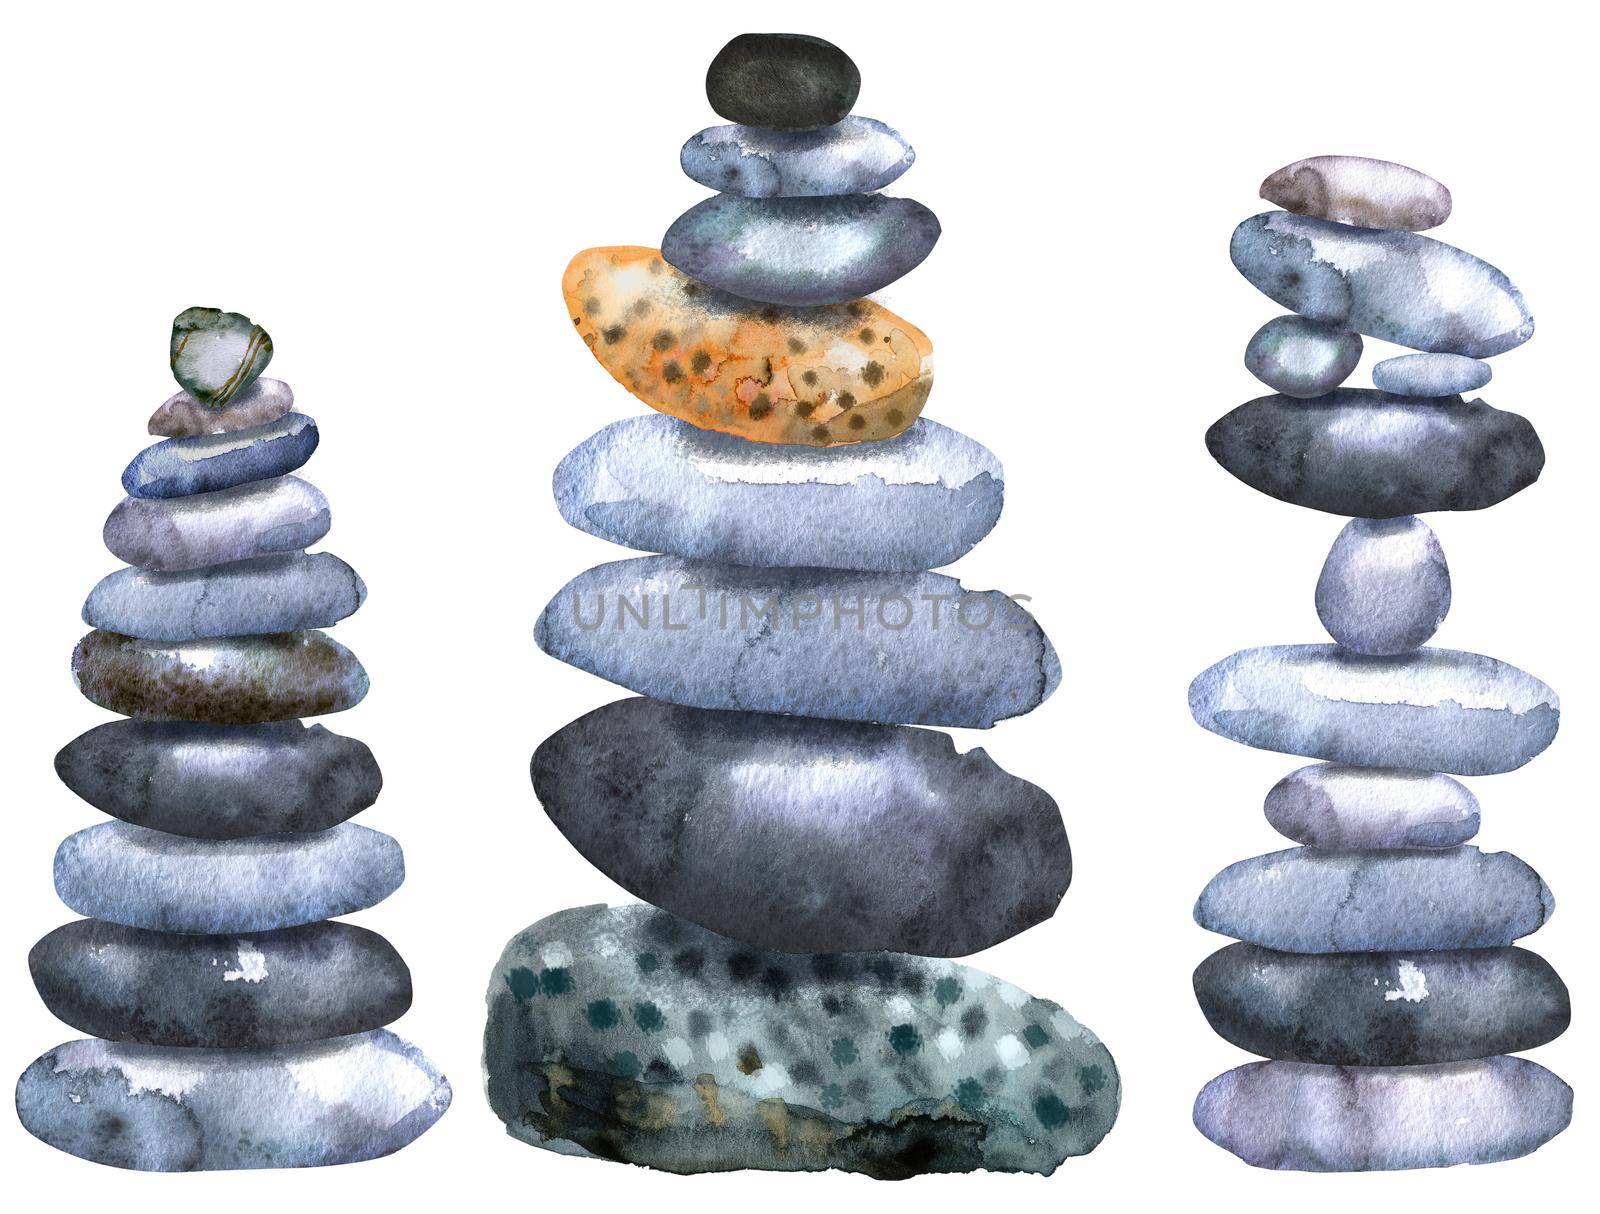 Watercolour painting of a stacks of flat pebbles by NataOmsk